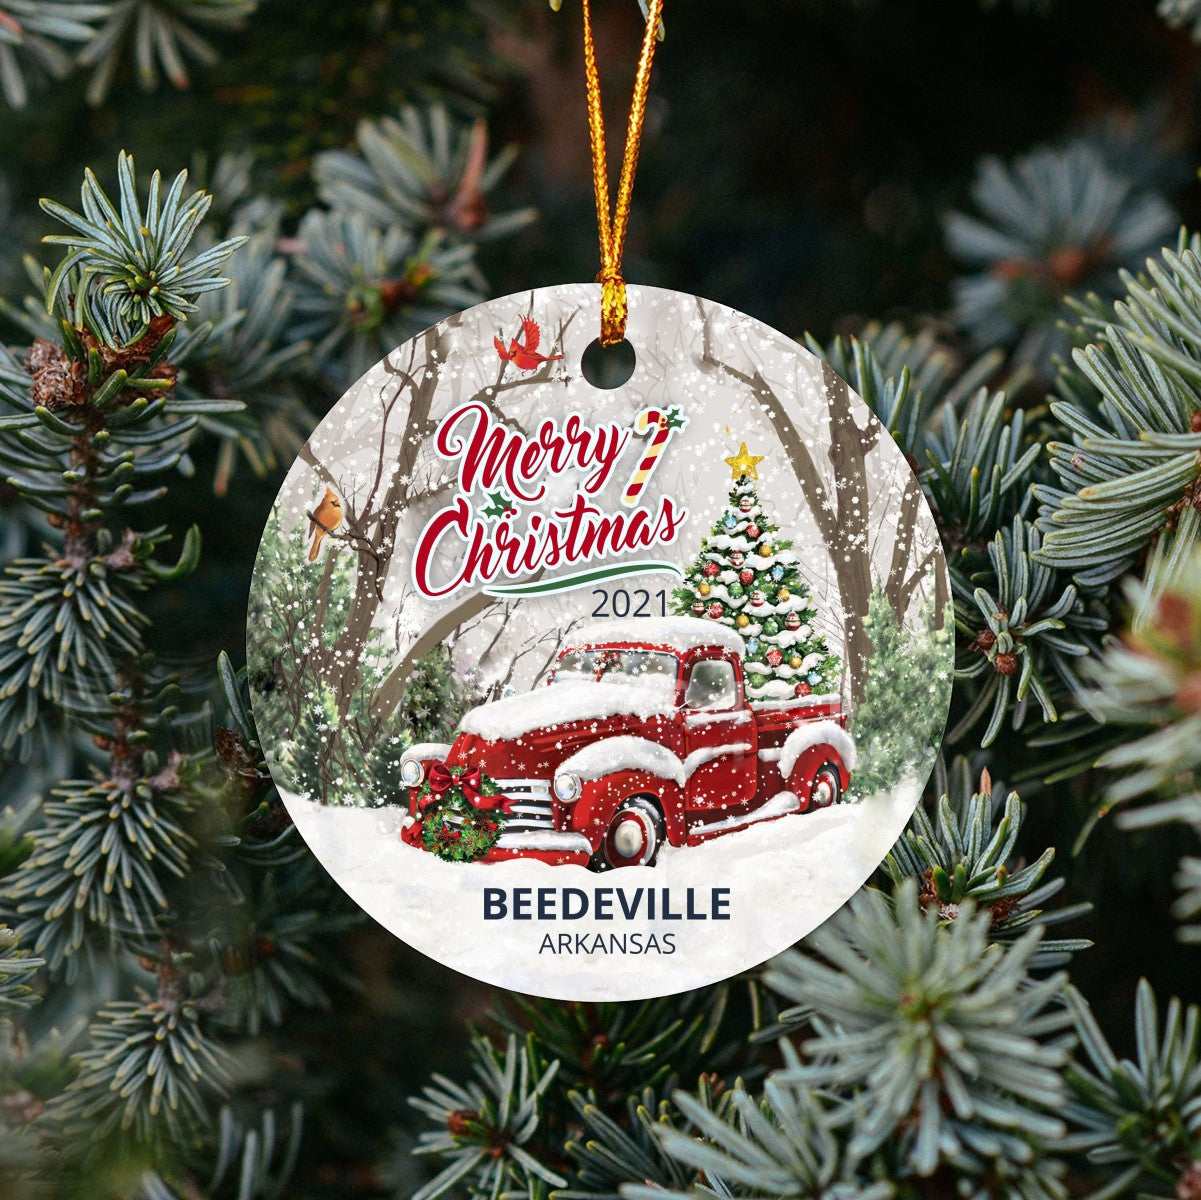 Christmas Tree Ornaments Beedeville - Ornament With Name City, State Beedeville Arkansas AR Ornament - Red Truck Xmas Ornaments 3'' Plastic Gift For Family, Friend And Housewarming